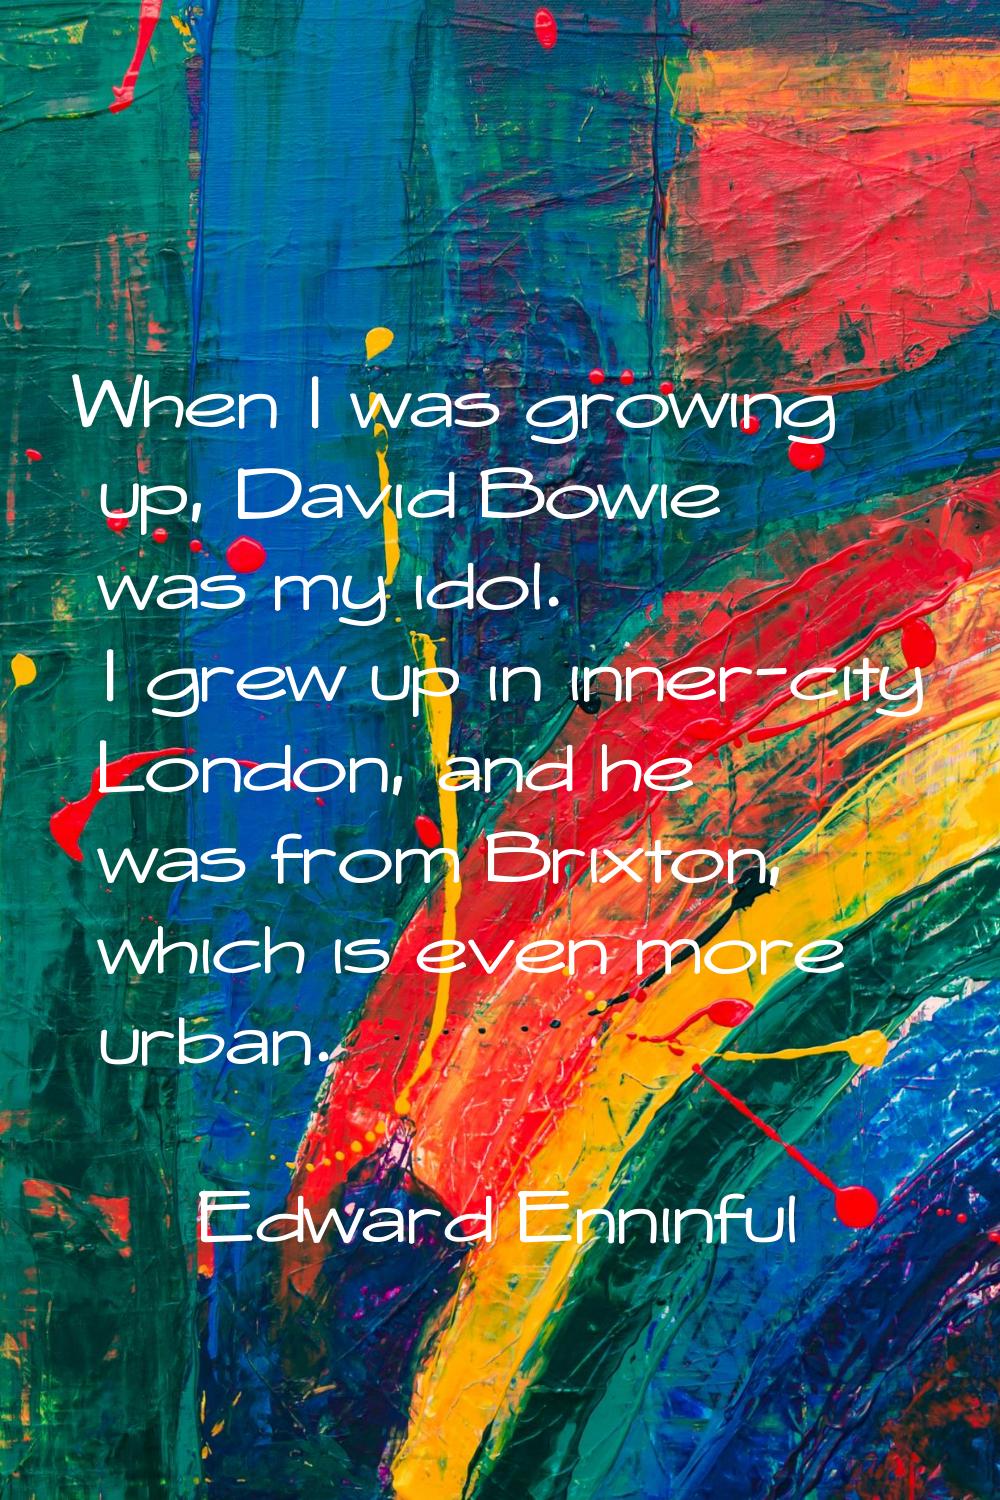 When I was growing up, David Bowie was my idol. I grew up in inner-city London, and he was from Bri